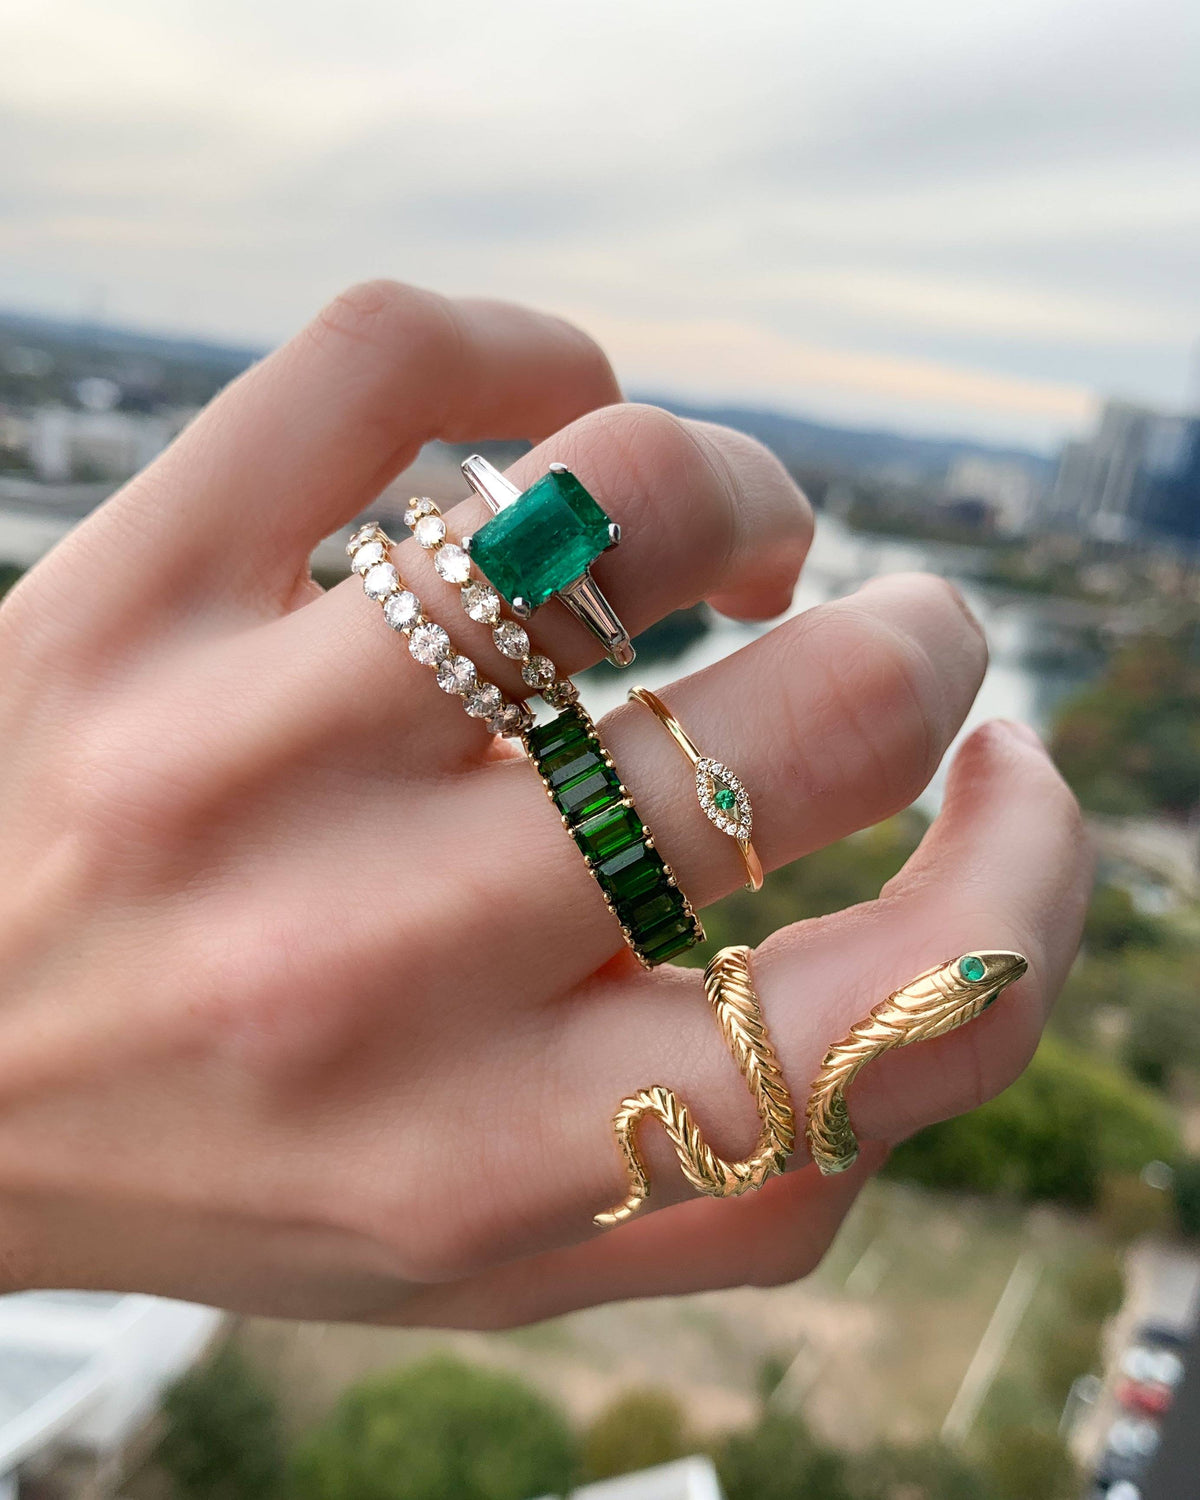 Emerald cut Emerald Translunar Ring with Tapered Baguette Diamond sides by Good Stone available in Gold and Platinum